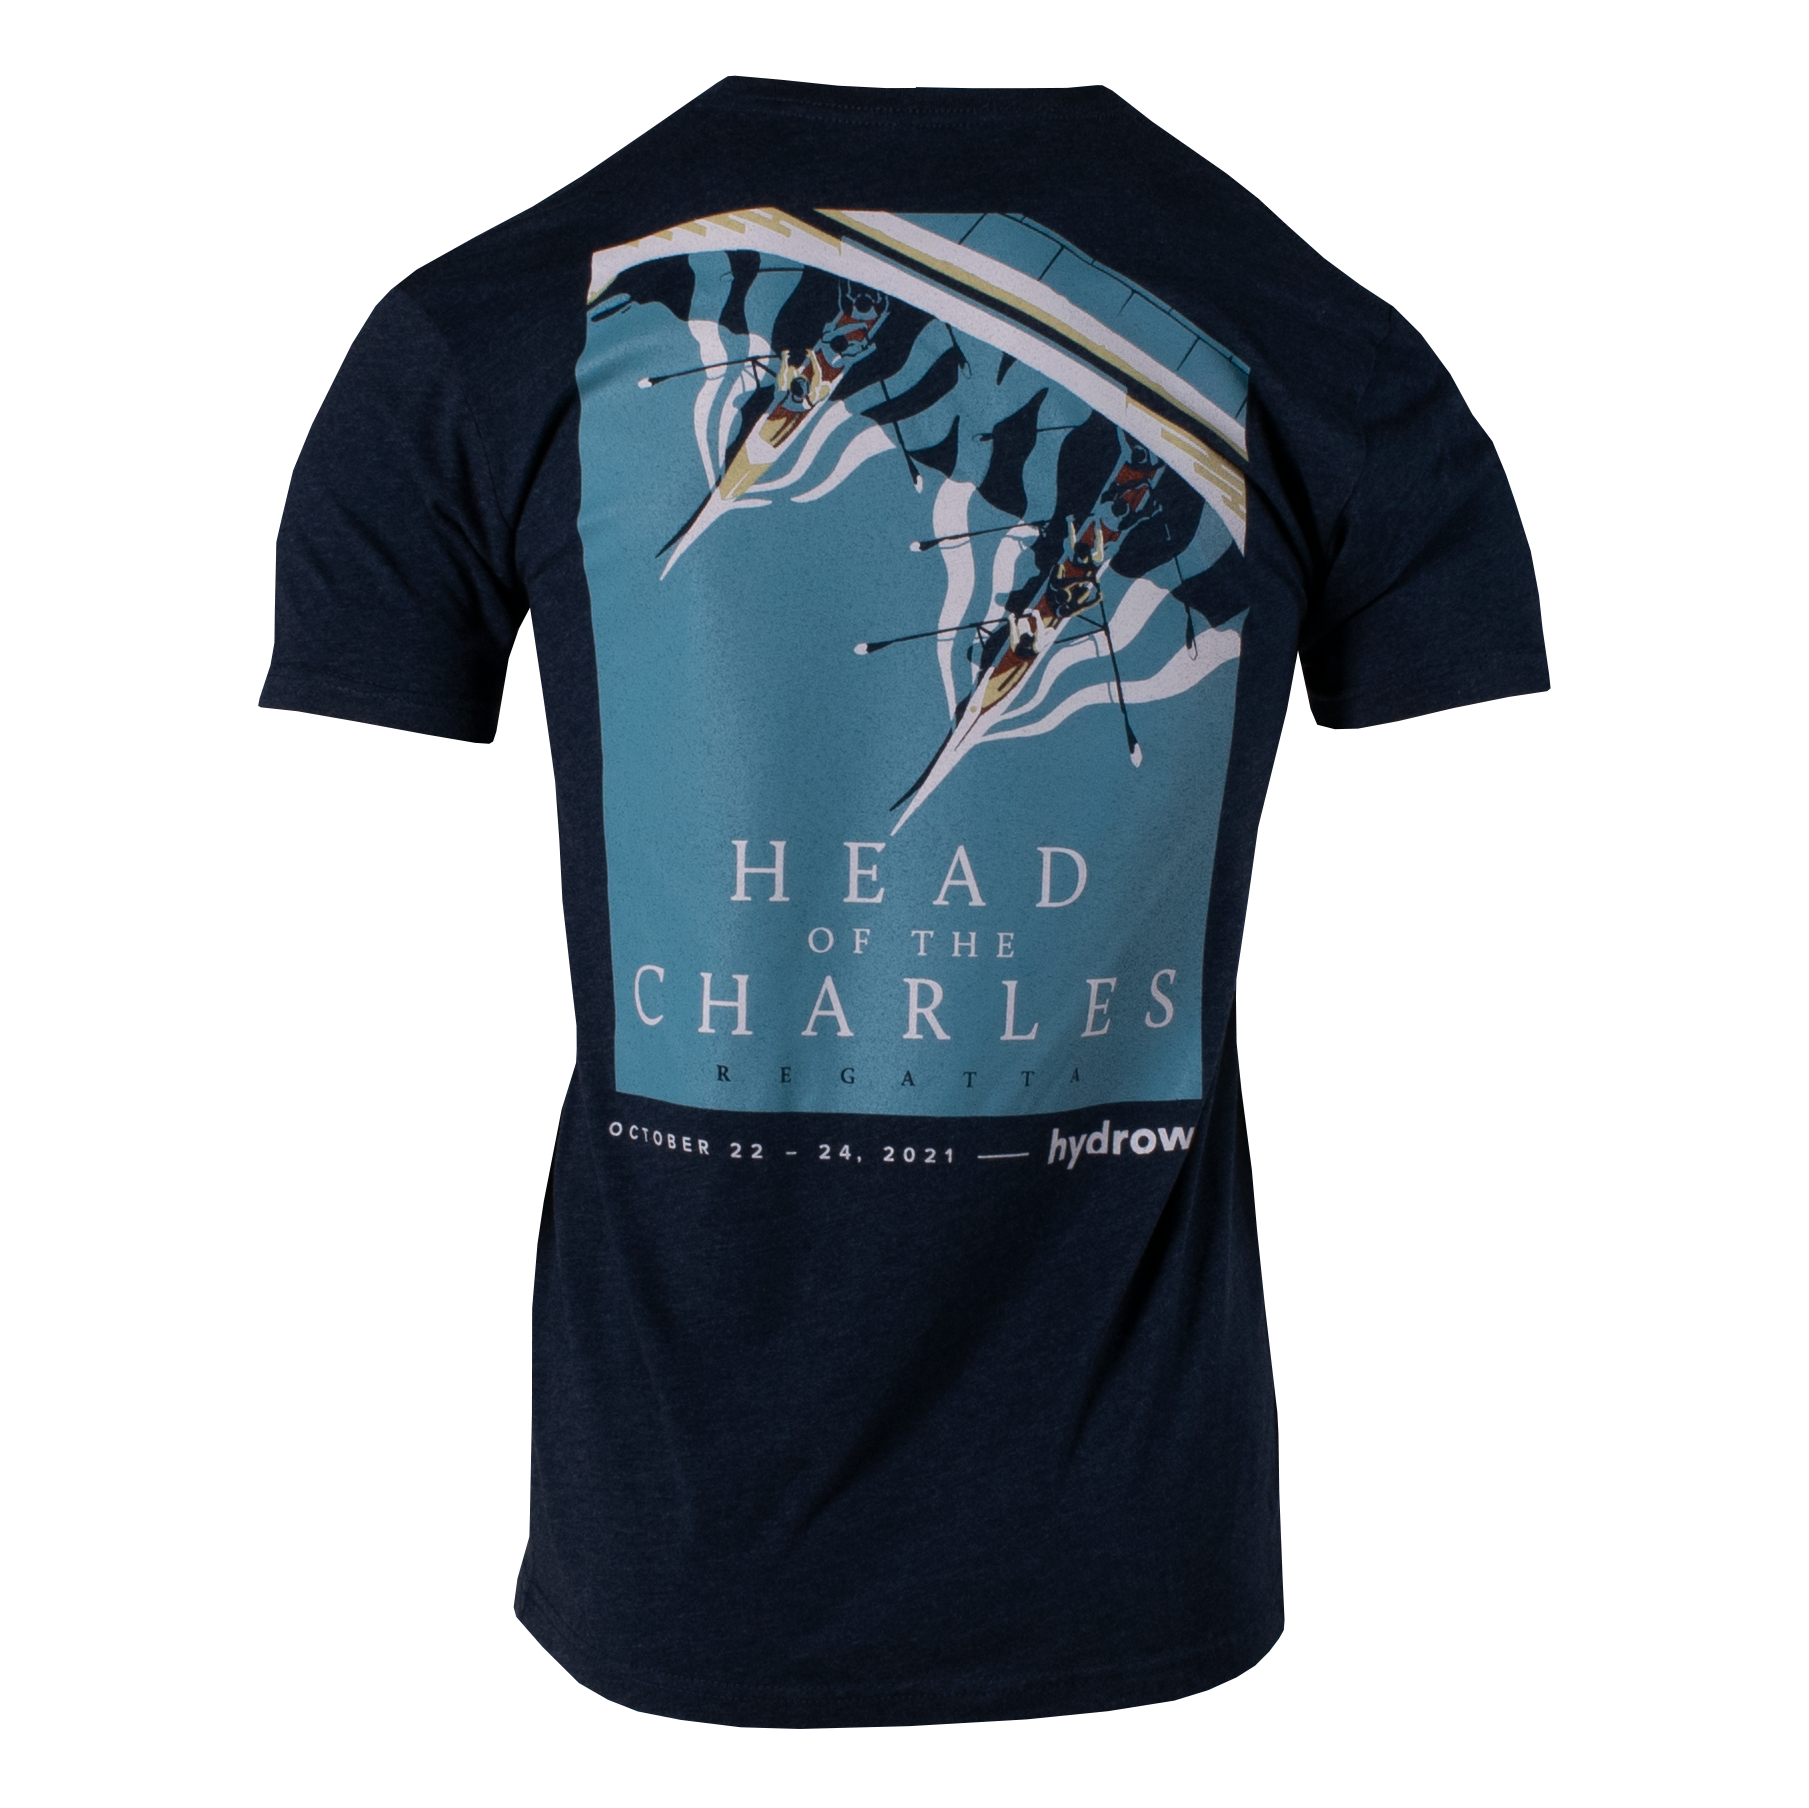 back view of navy shirt with head of the charles poster graphic